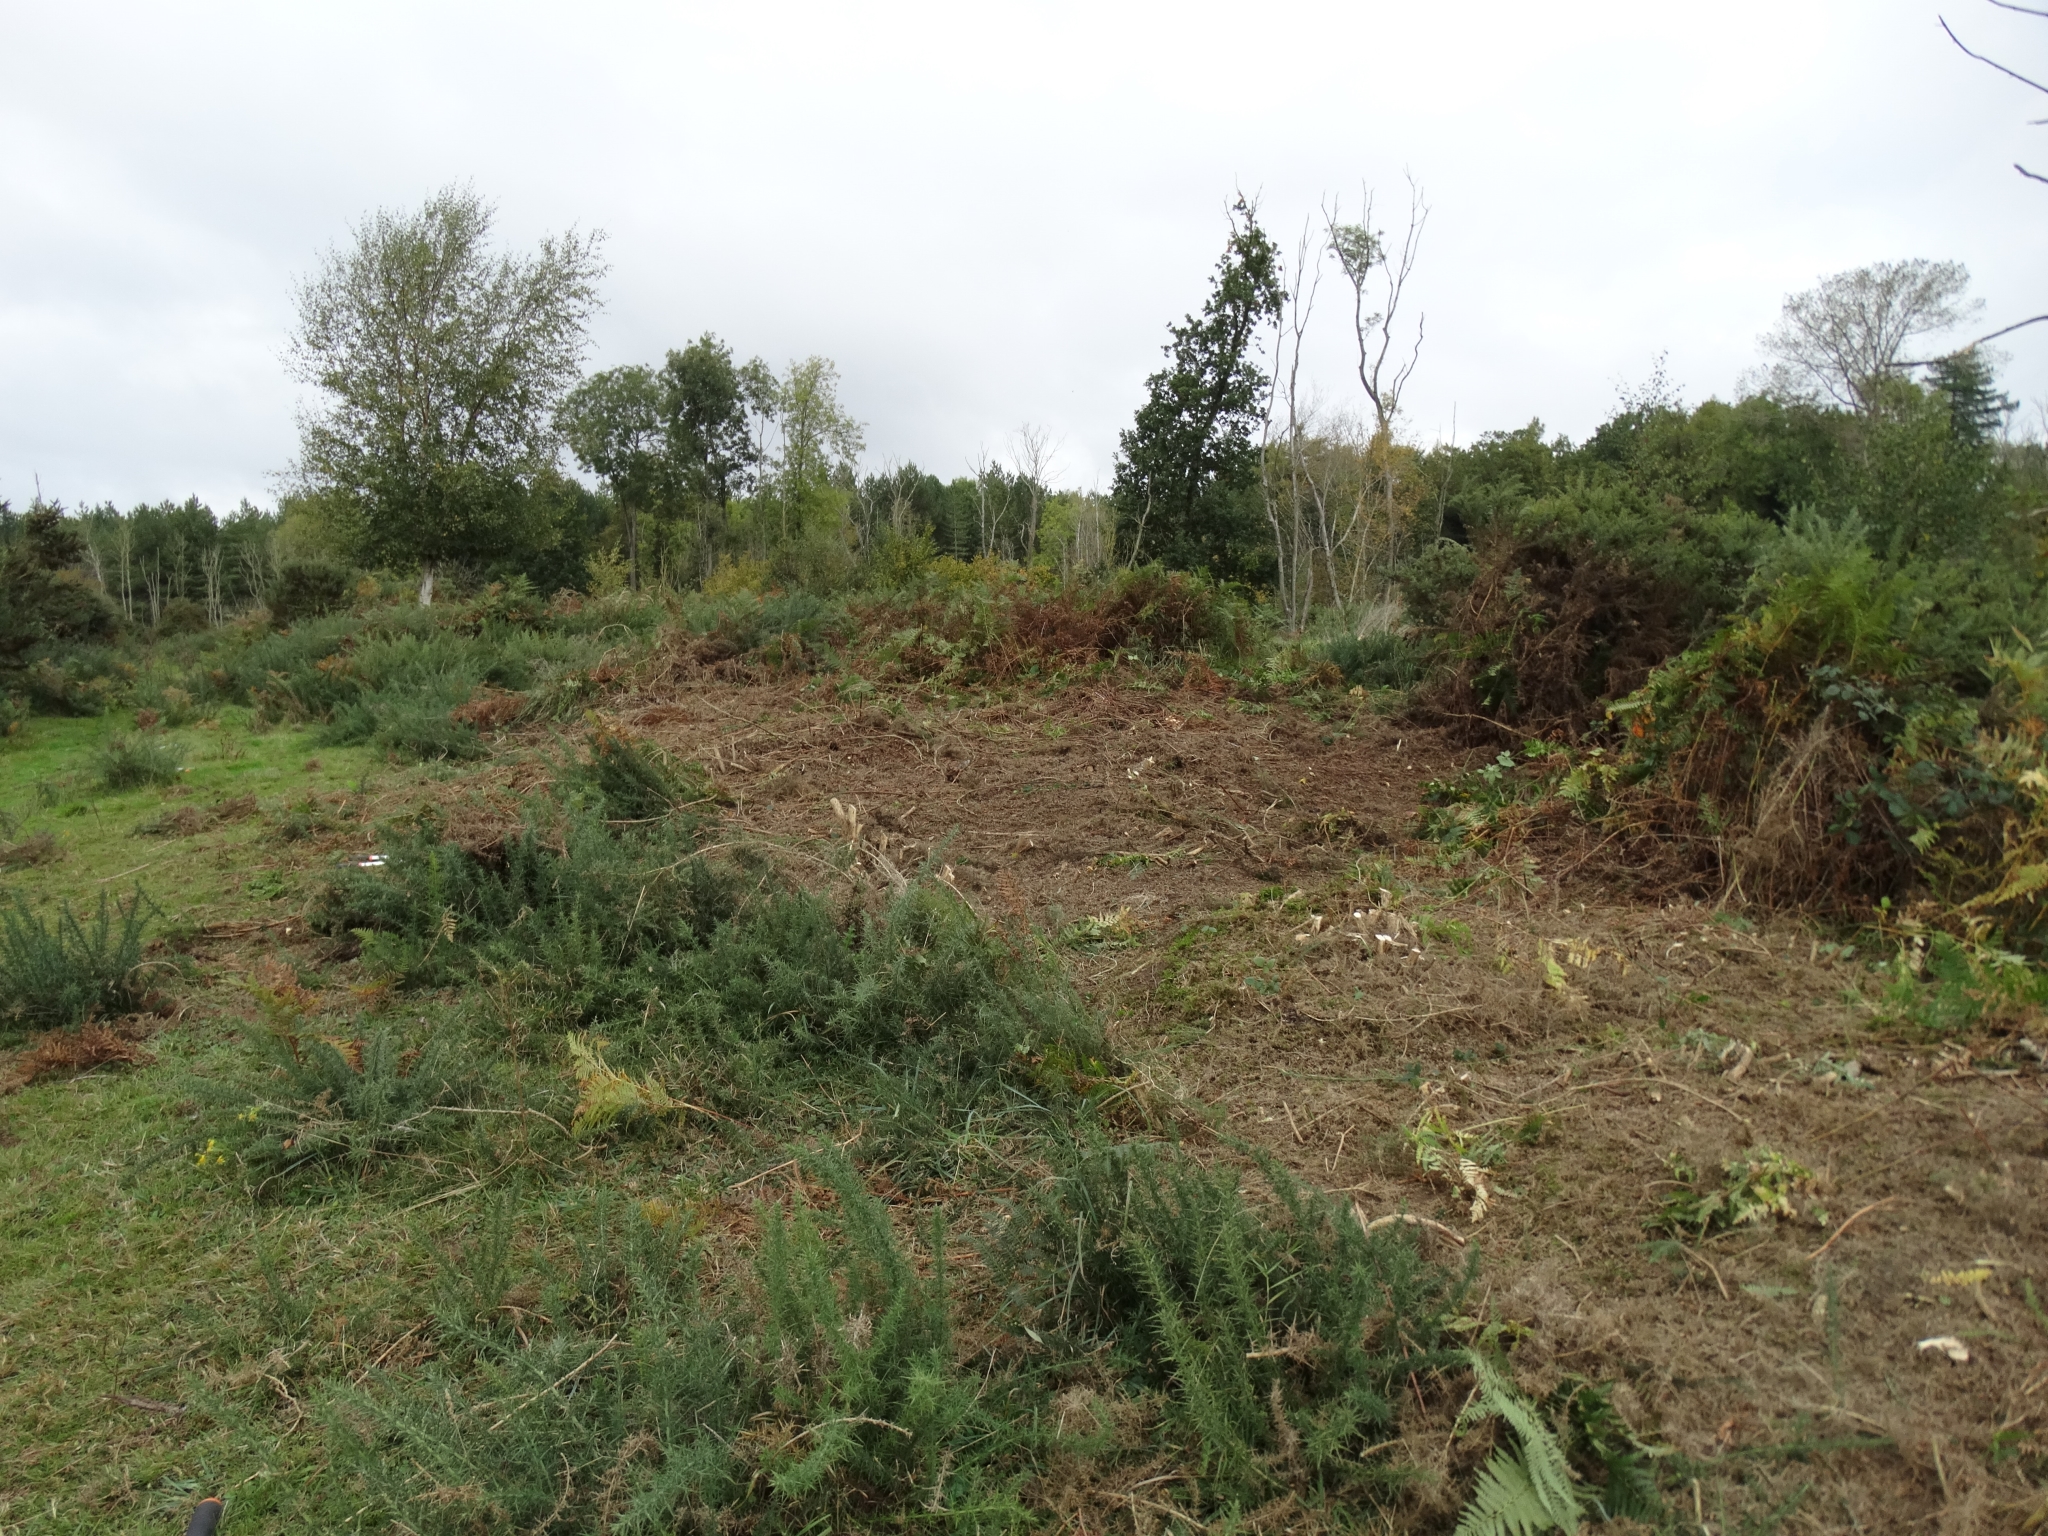 A photo from the FoTF Conservation Event - October 2019 - Gorse Clearance at Hockham Hills & Holes : A large pile of Gorse cleared by the volunteers